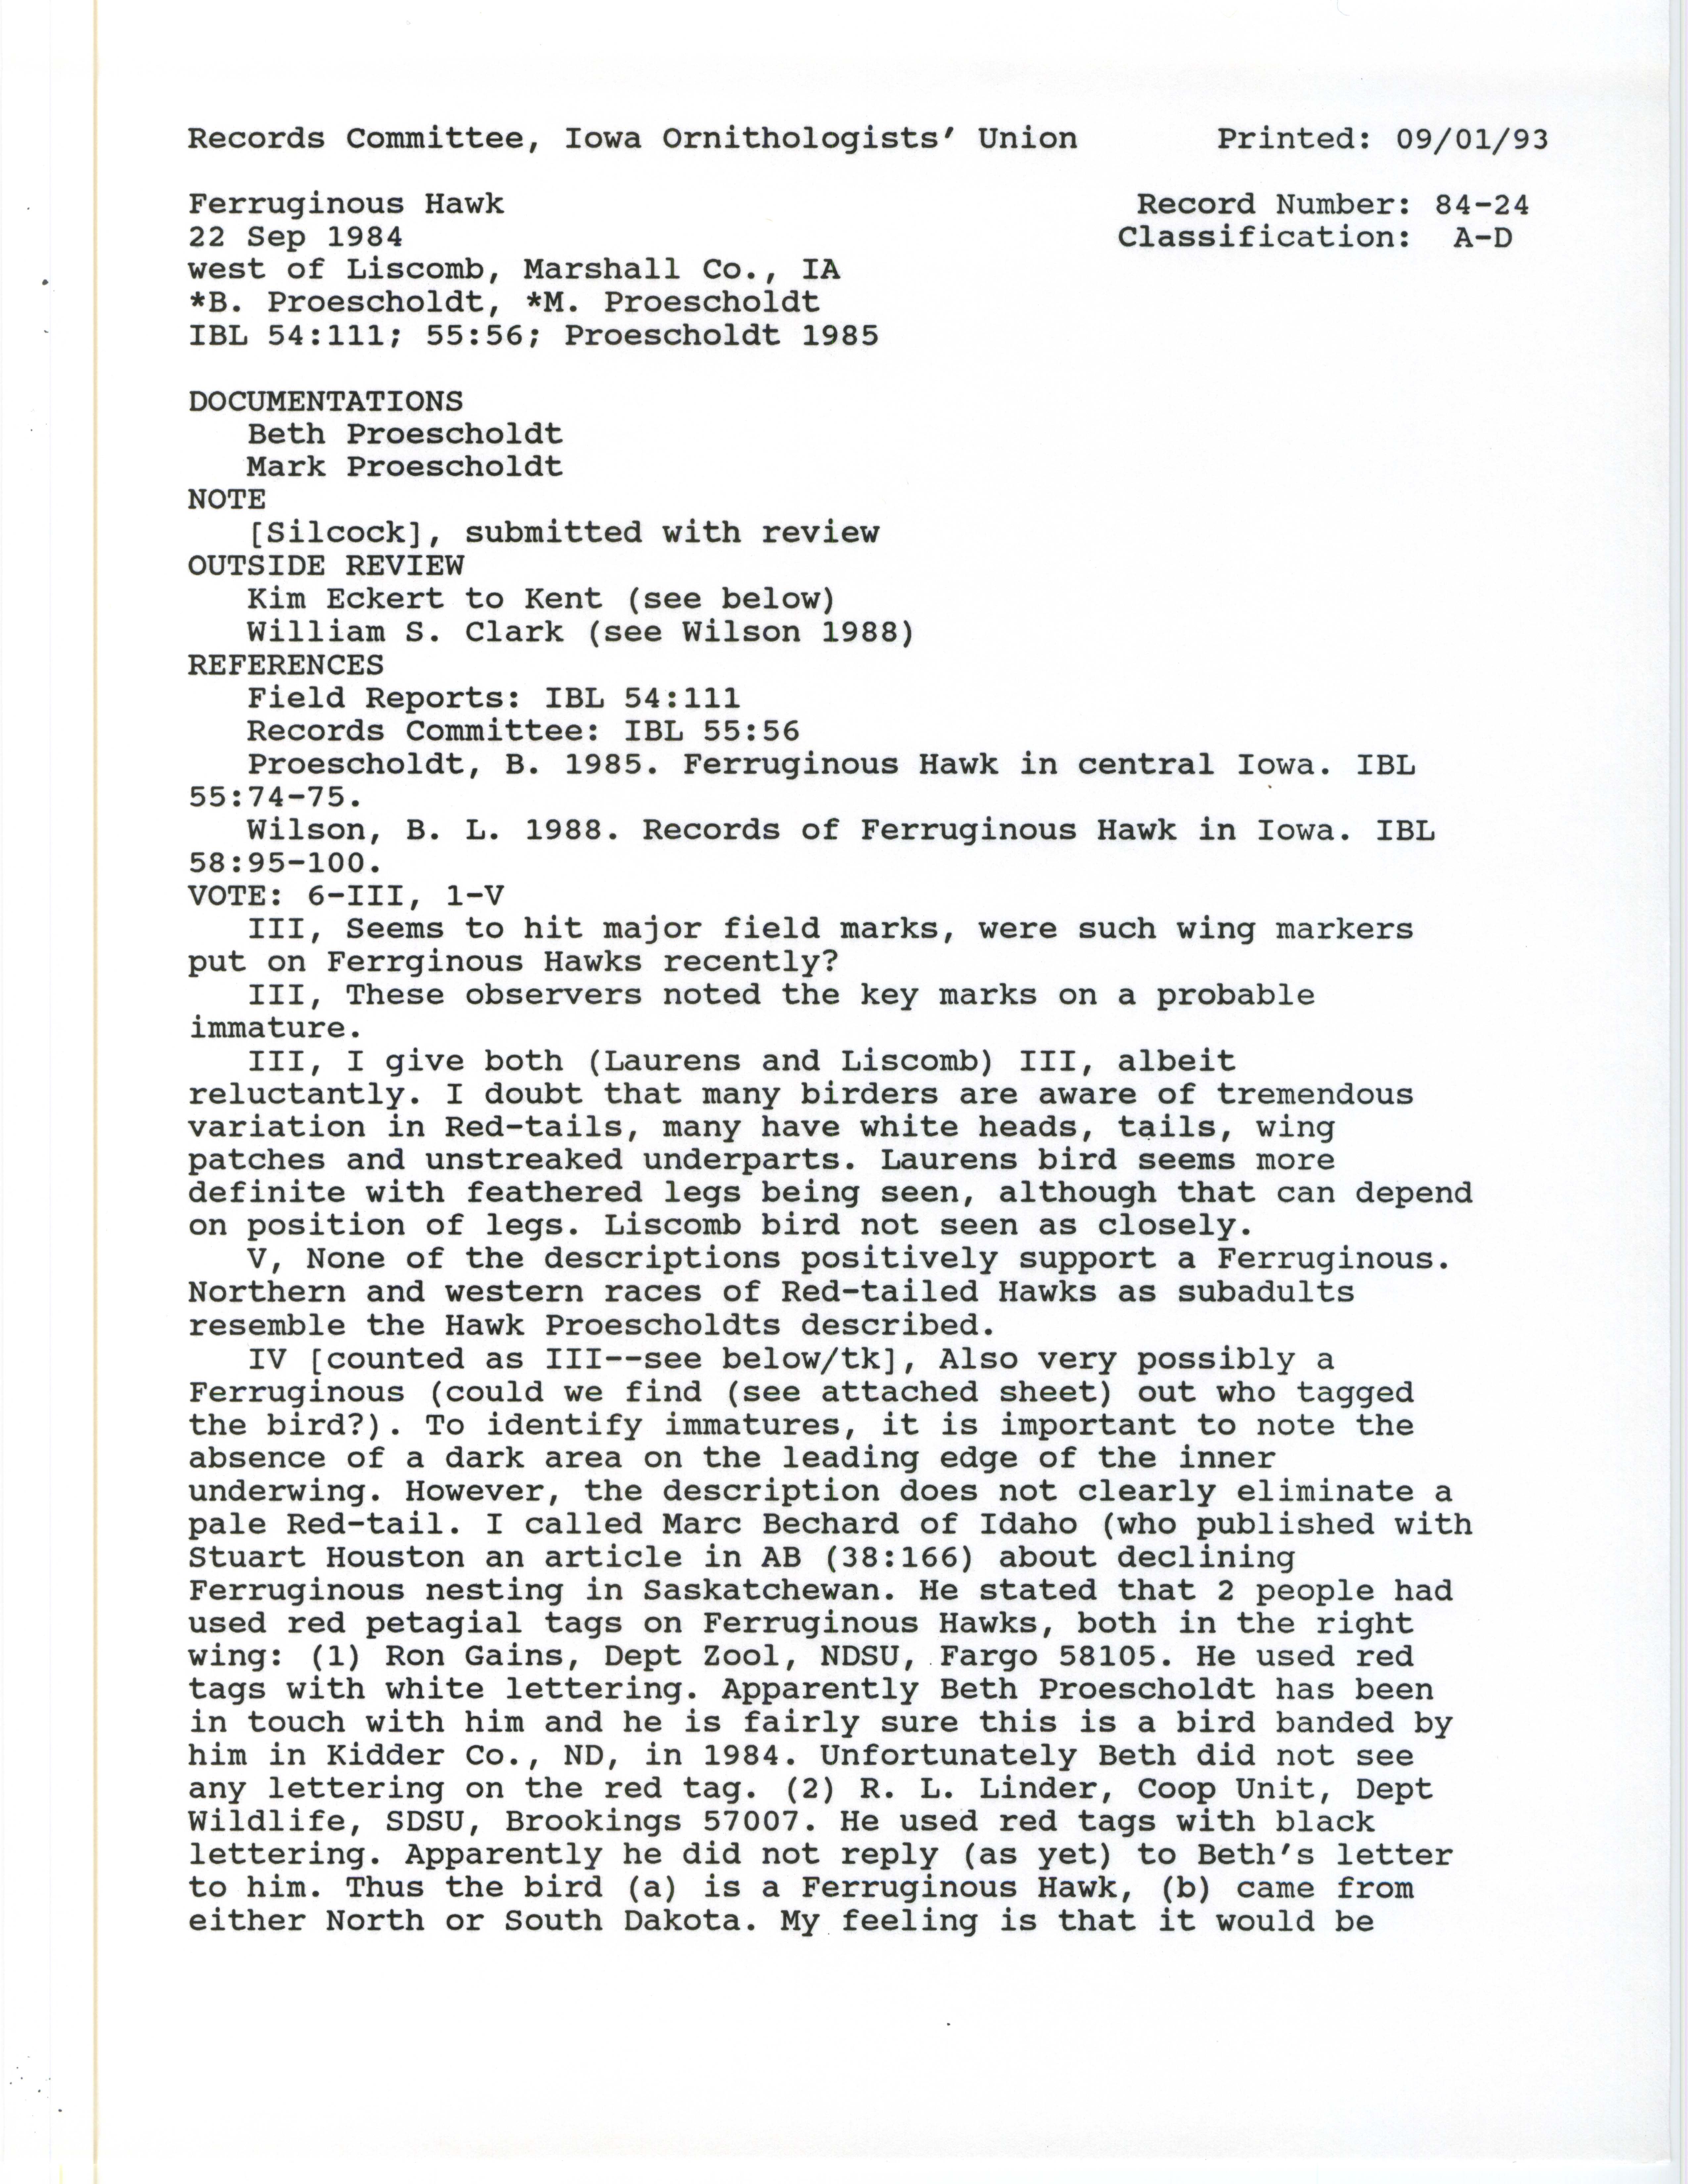 Records Committee review for rare bird sighting of Ferruginous Hawk west of Liscomb, 1984